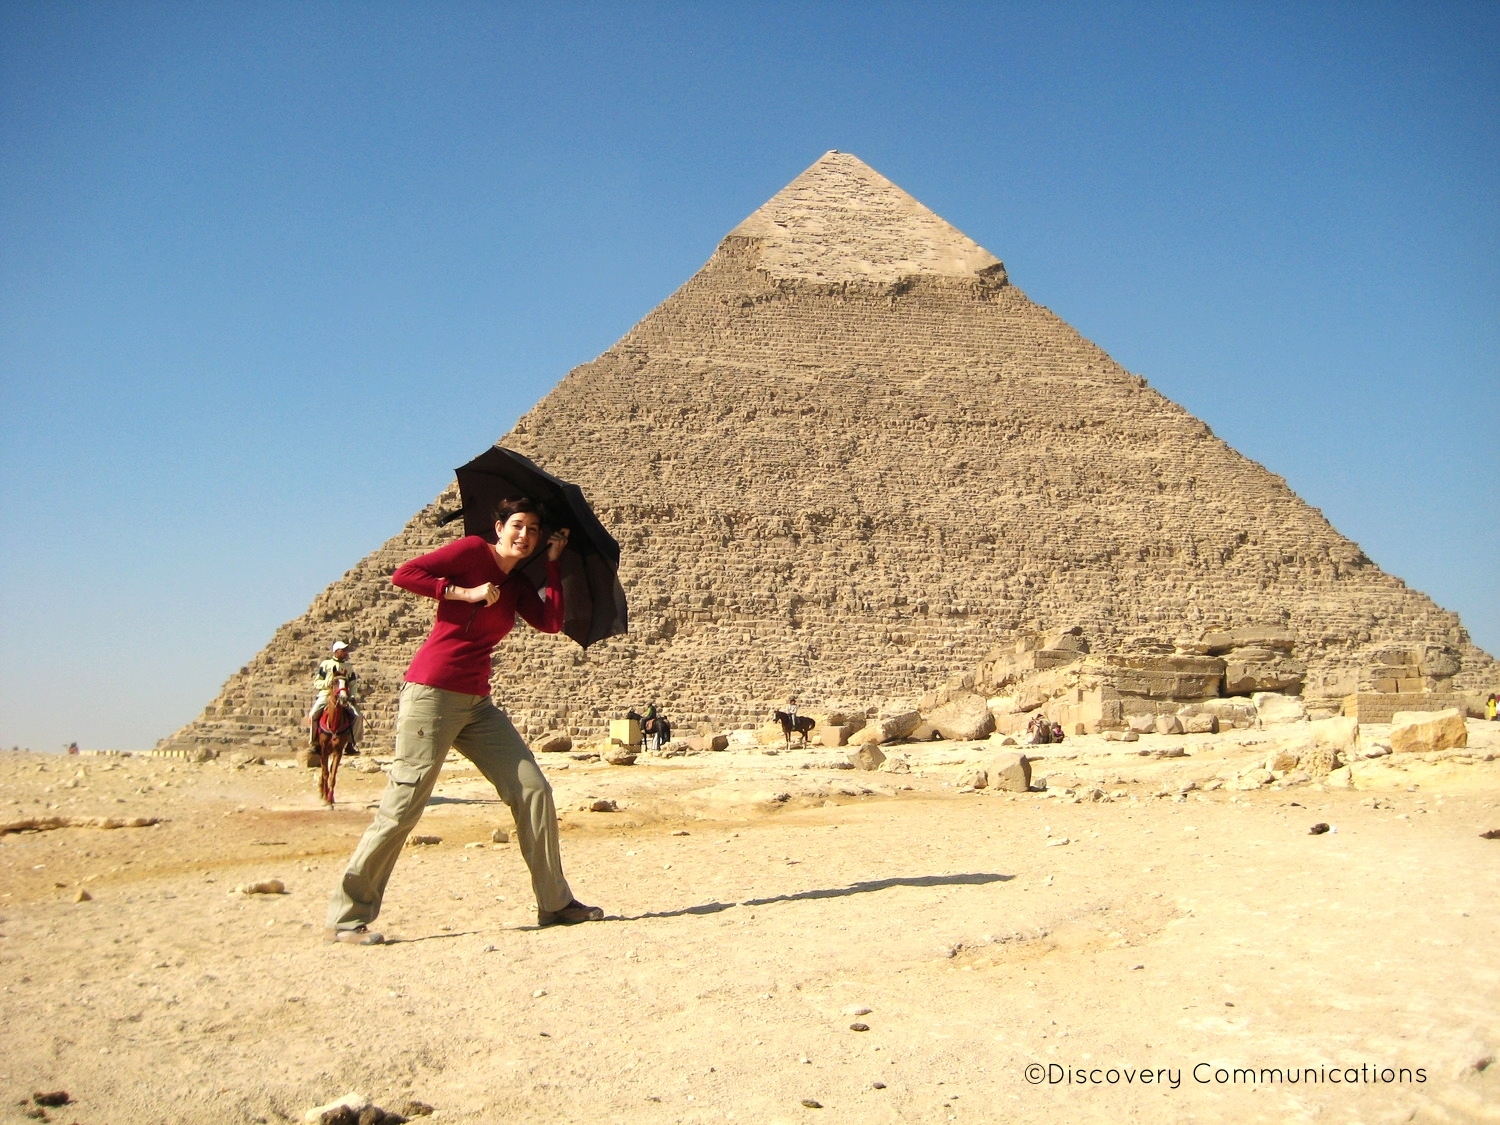  Having fun on location in front of the pyramid of Khafre! 